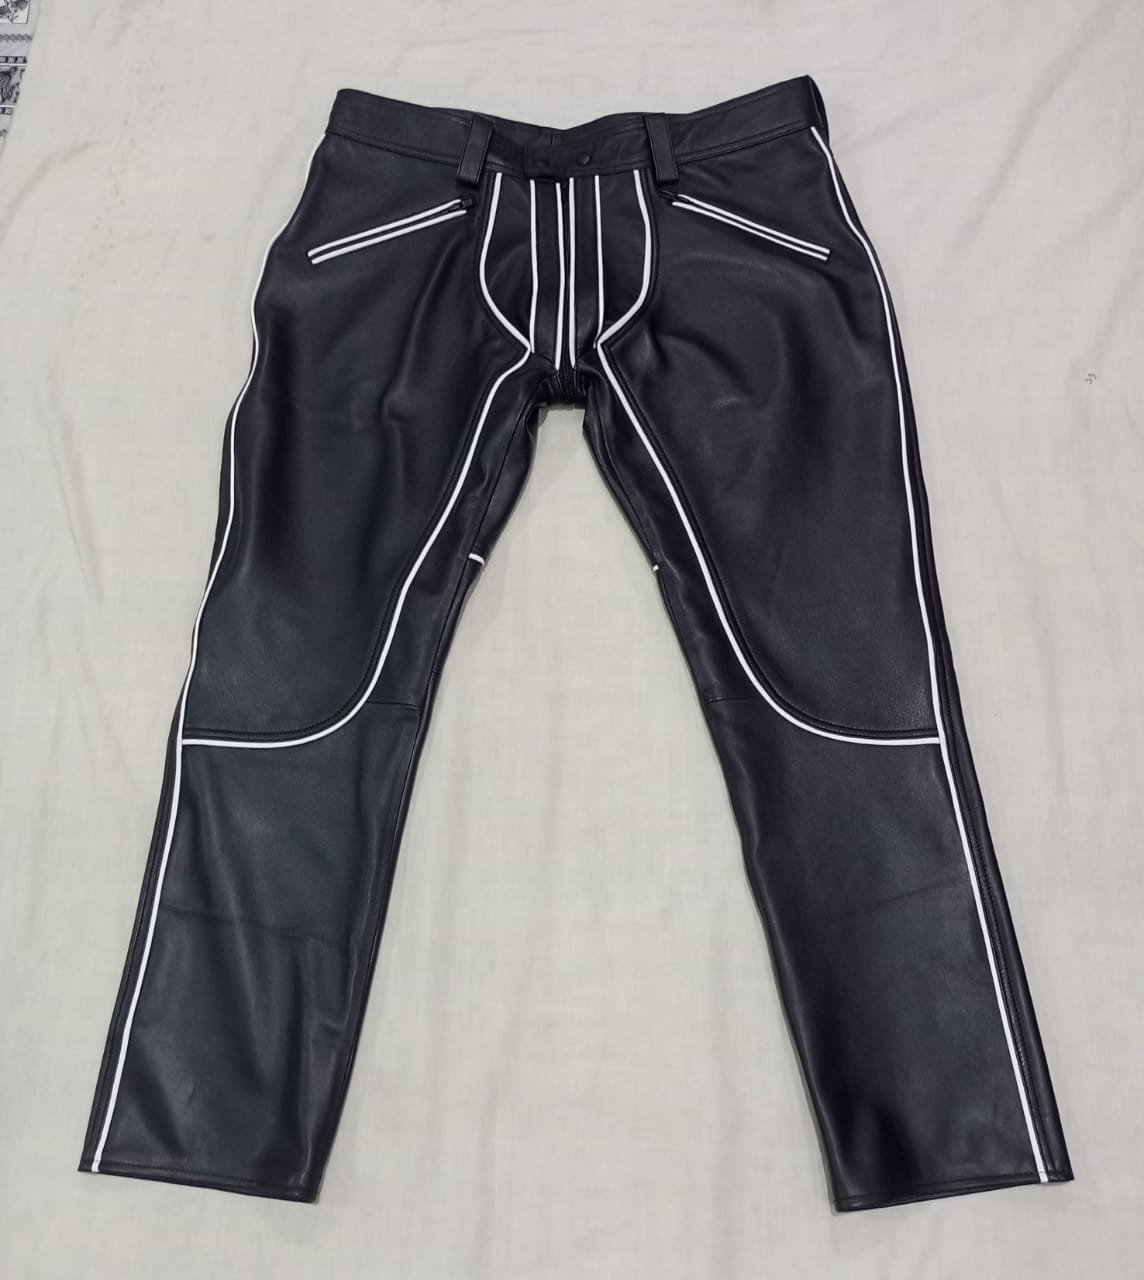 Leather pant with white piping.